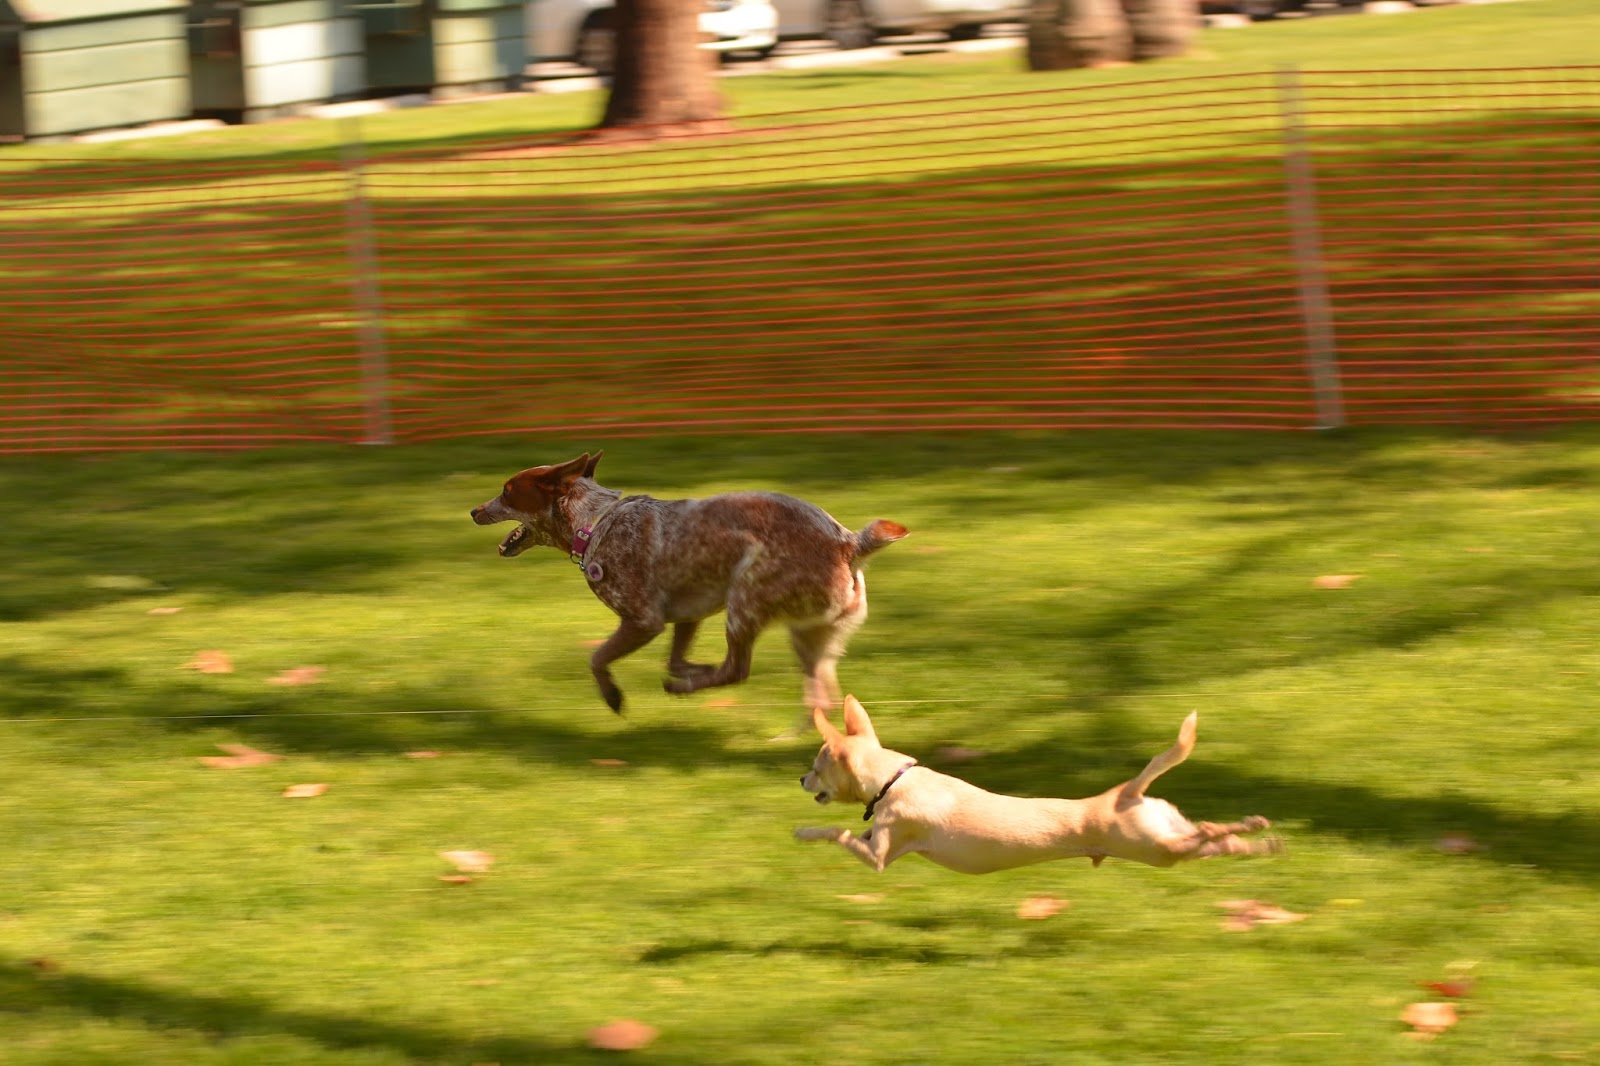 Wicked Coursing - Dog Sports, Dog Lure Coursing, Dog Race, Dog Chase